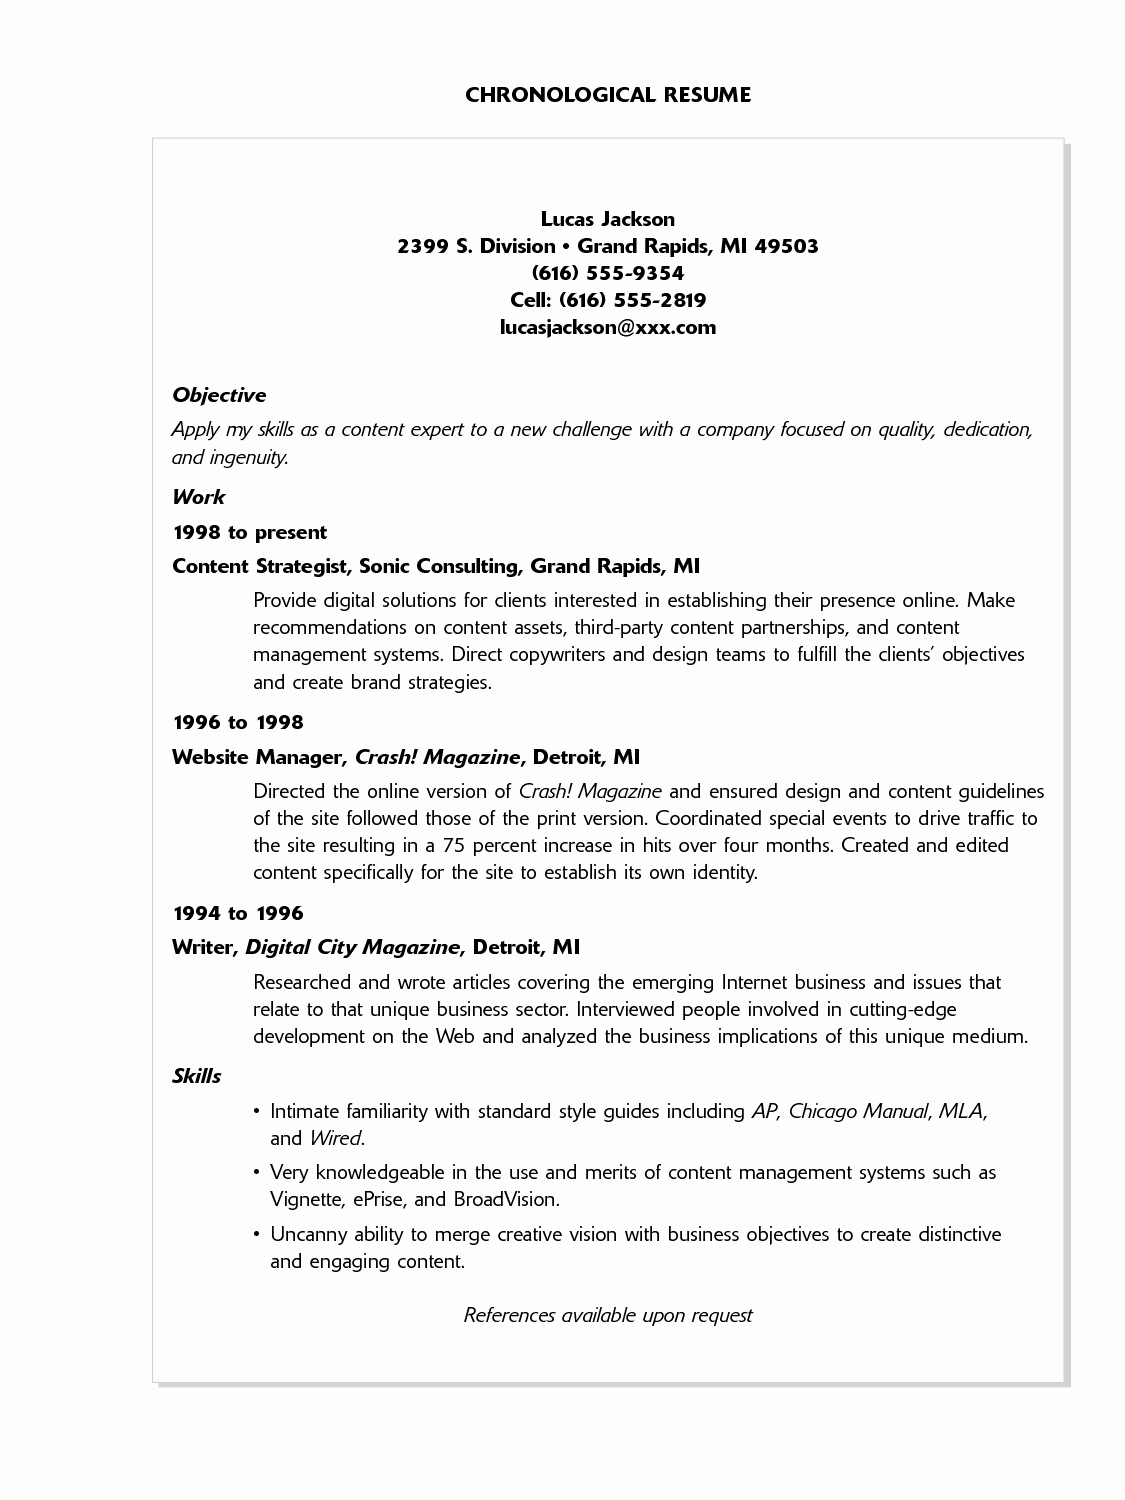 puter science resume templates